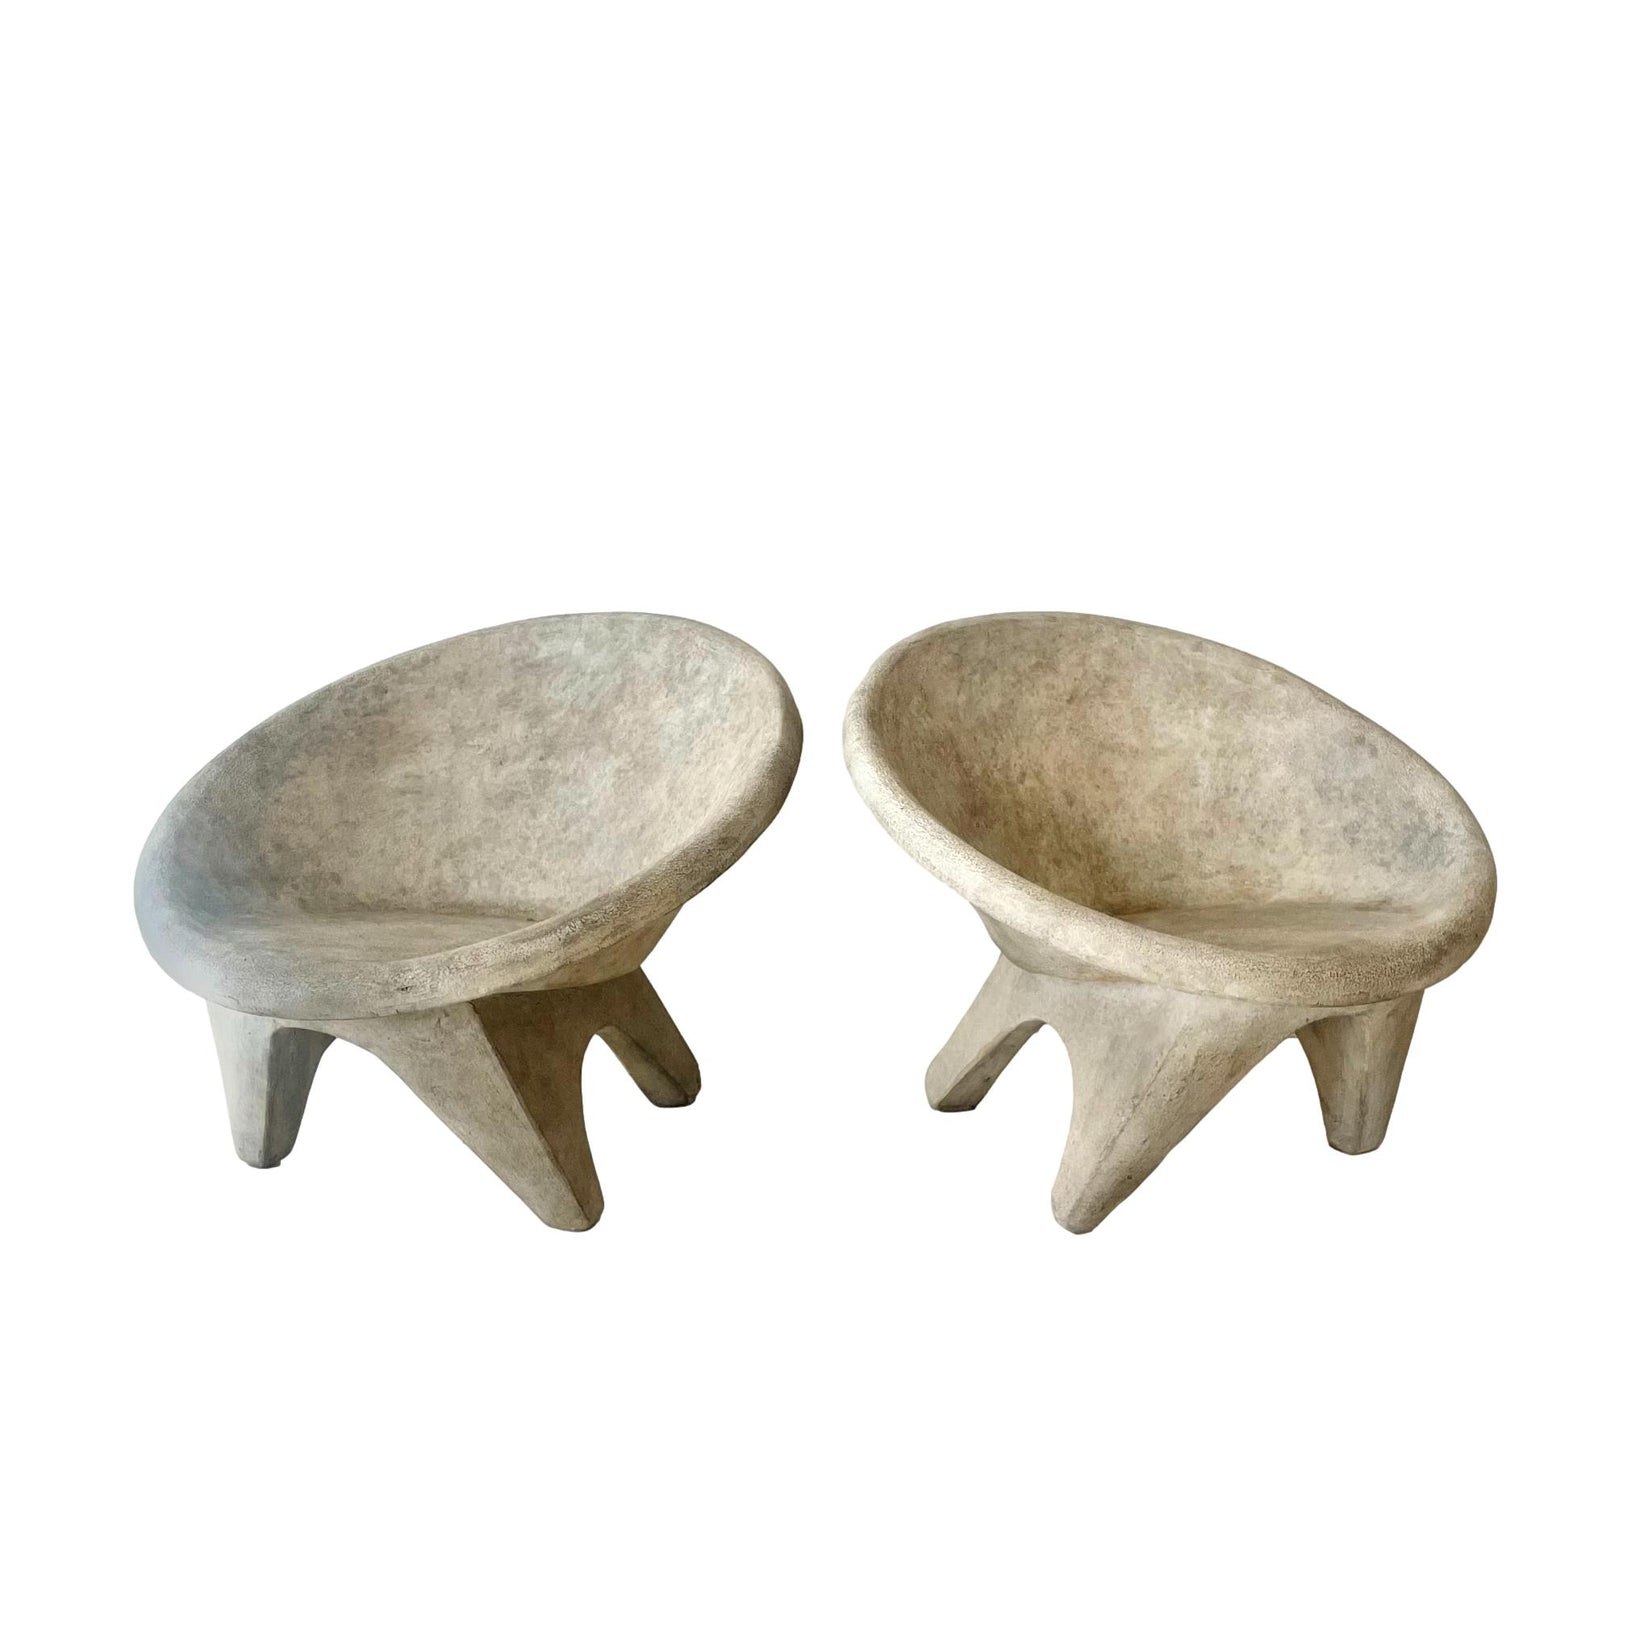 Pair of Sculptural Concrete Chairs by Merit Los Angeles